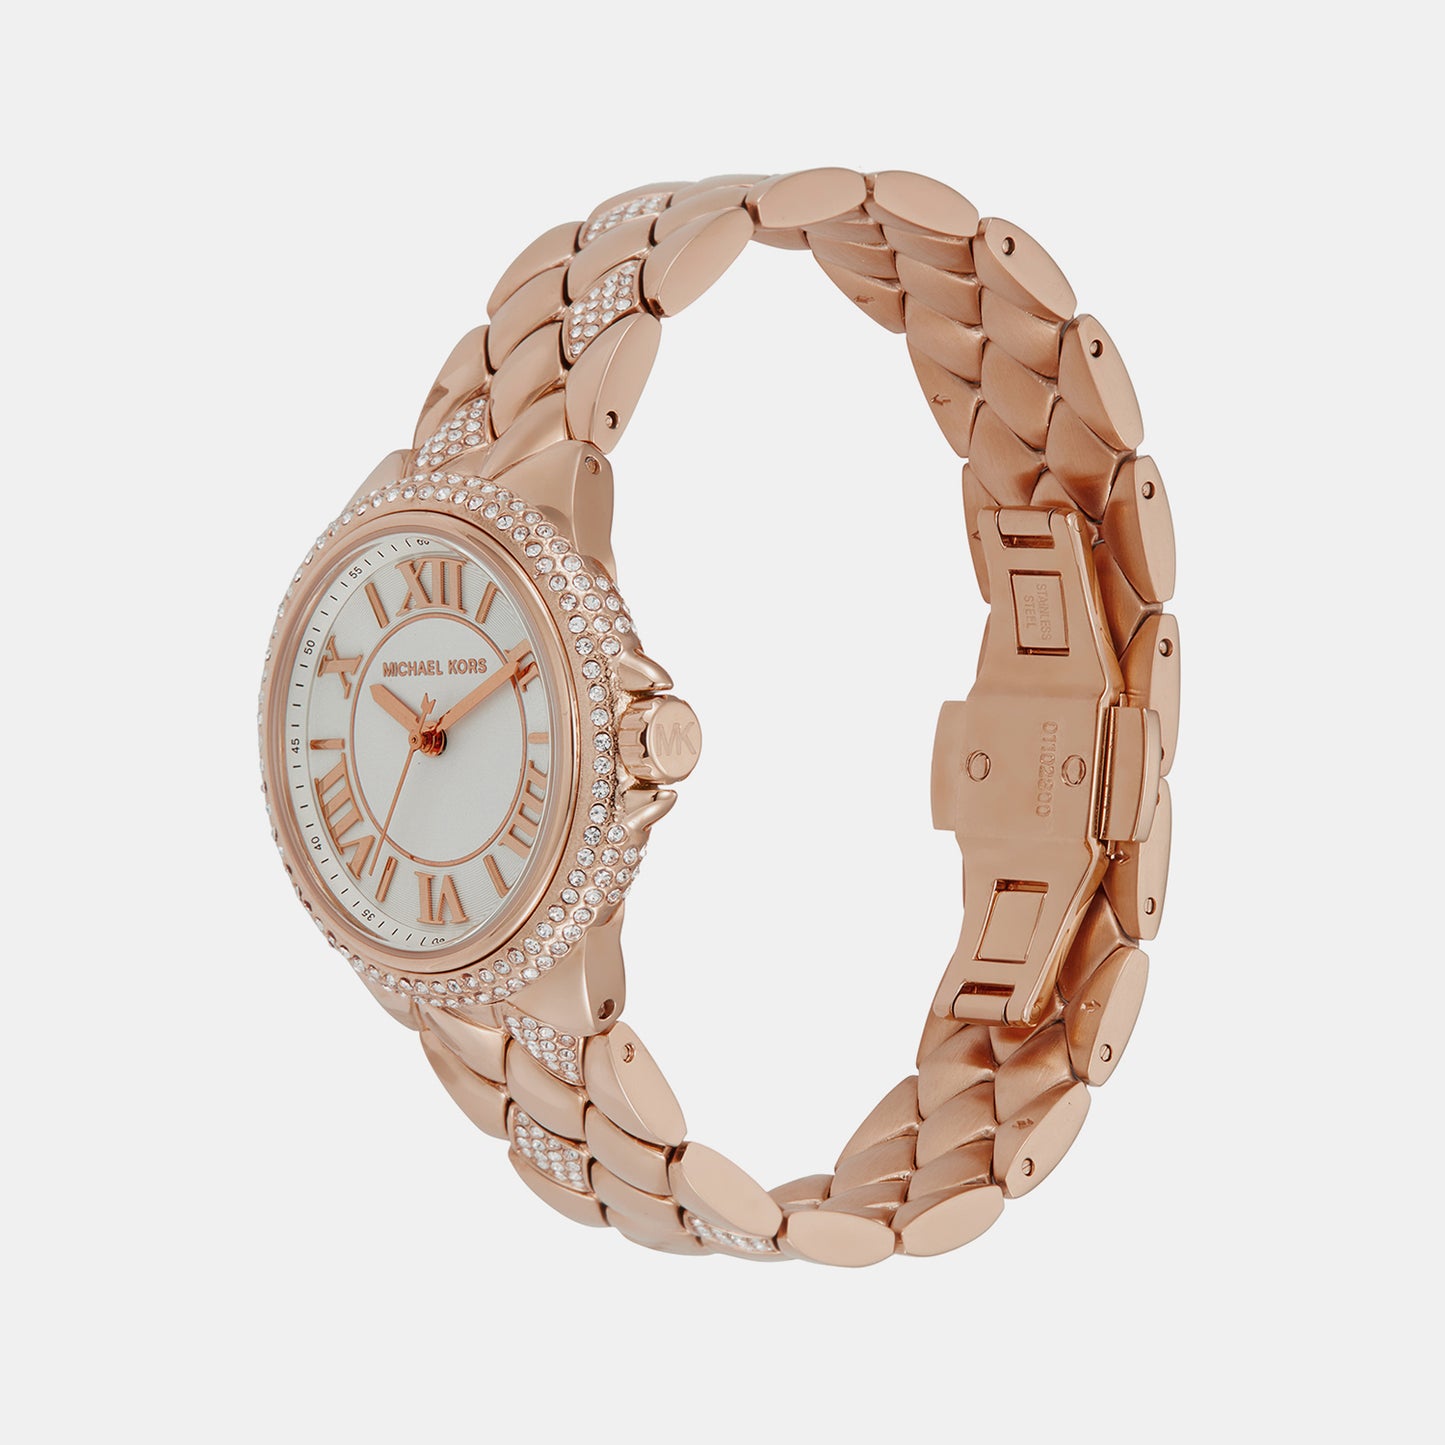 Female Camille Rose Gold Analog Stainless Steel Watch MK4810